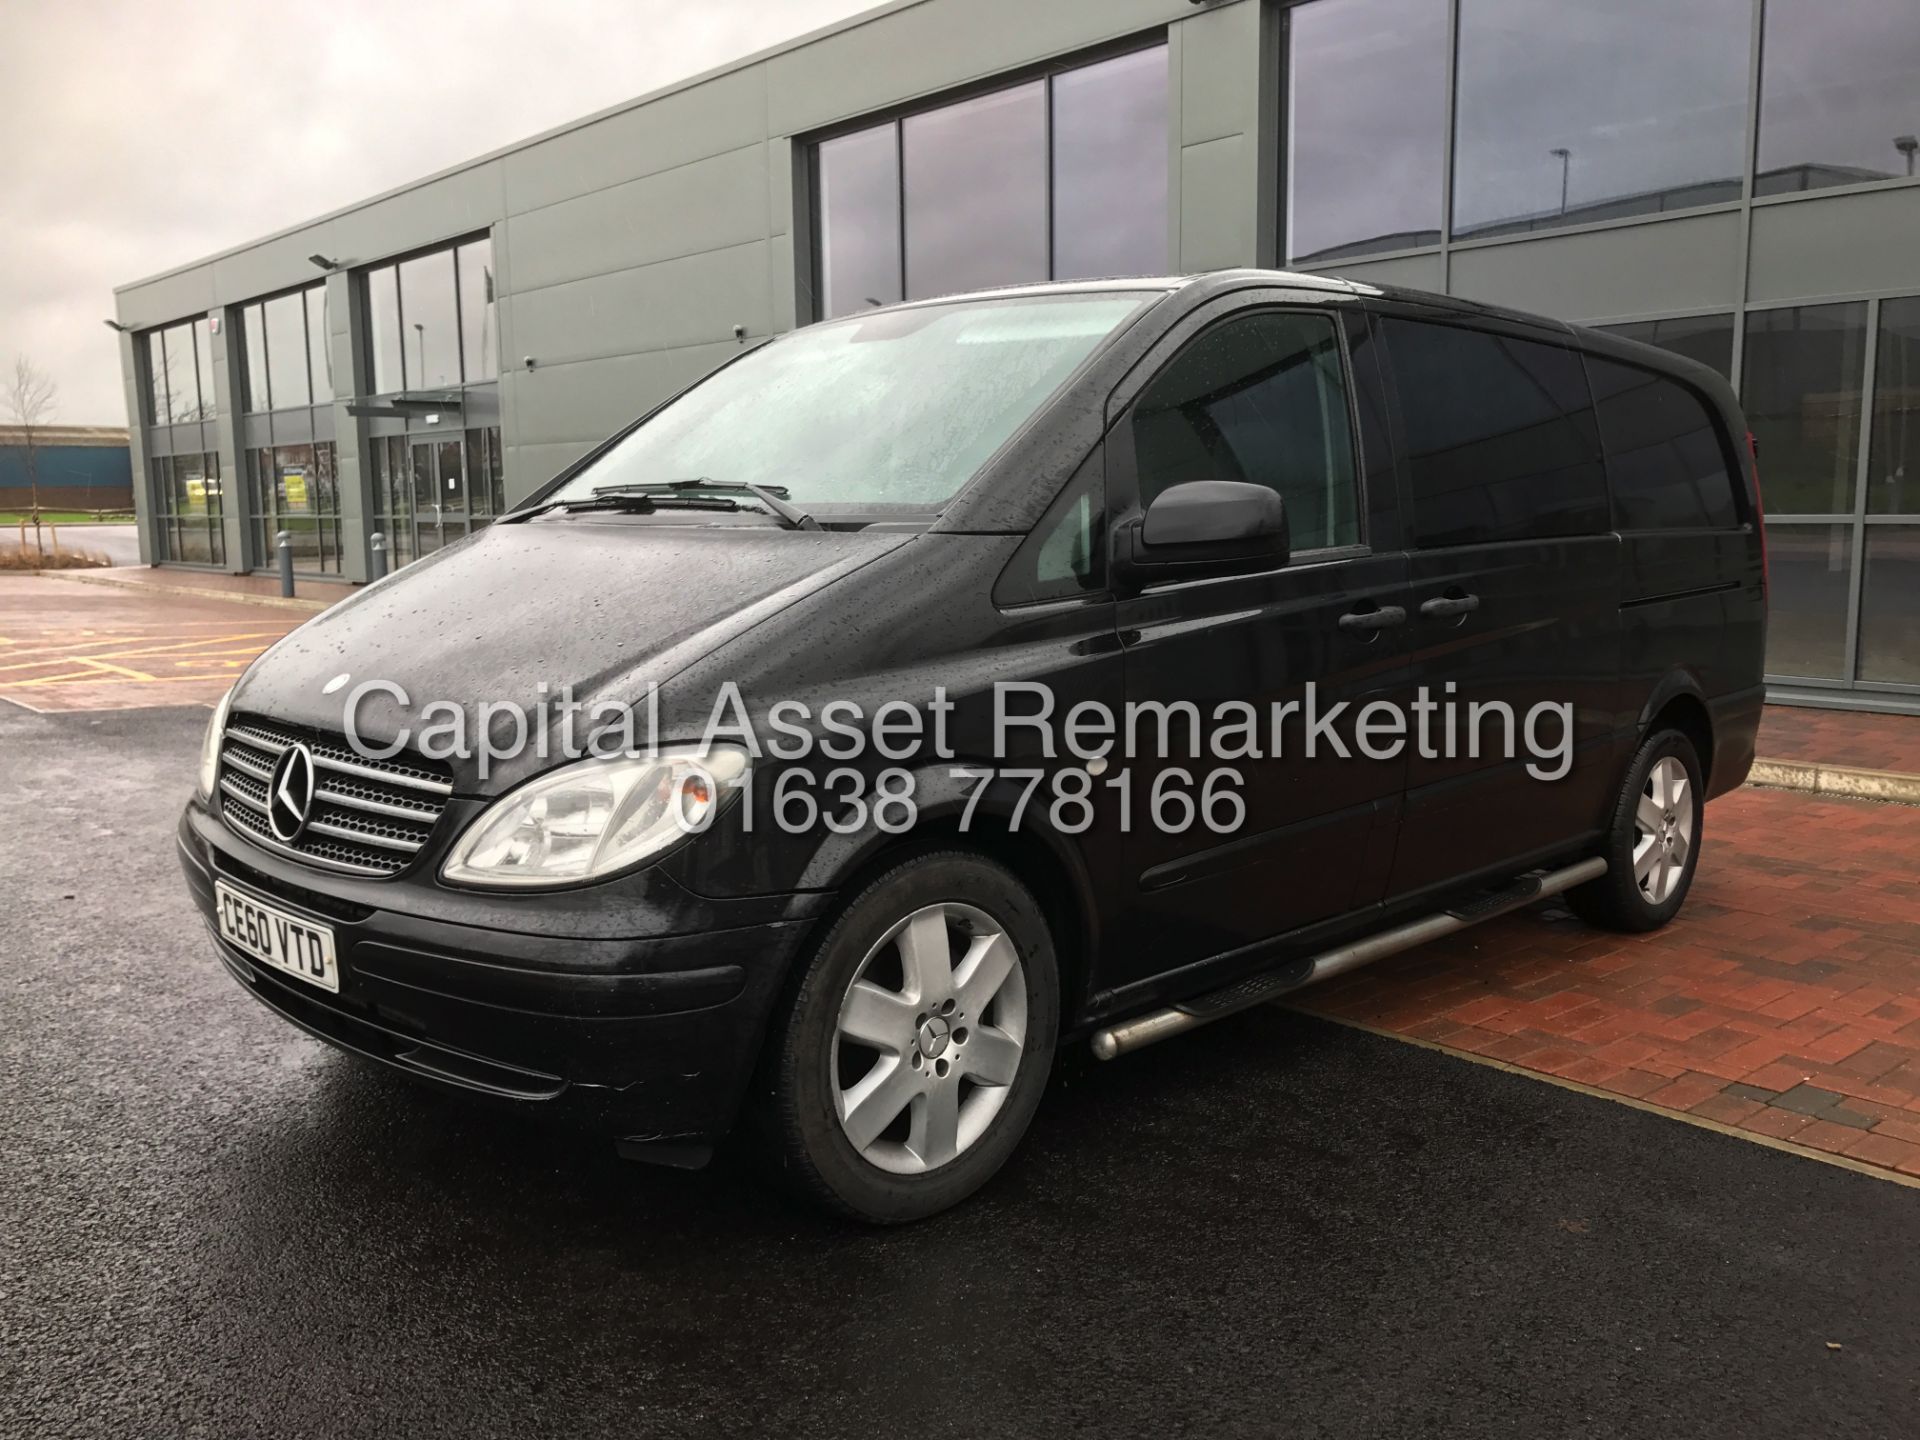 (ON SALE) MERCEDES VITO "SPORTY - 115BHP" LWB (2011 MODEL) 5 SEATER DUELINER -1 OWNER-AIR CON-ALLOYS - Image 4 of 18